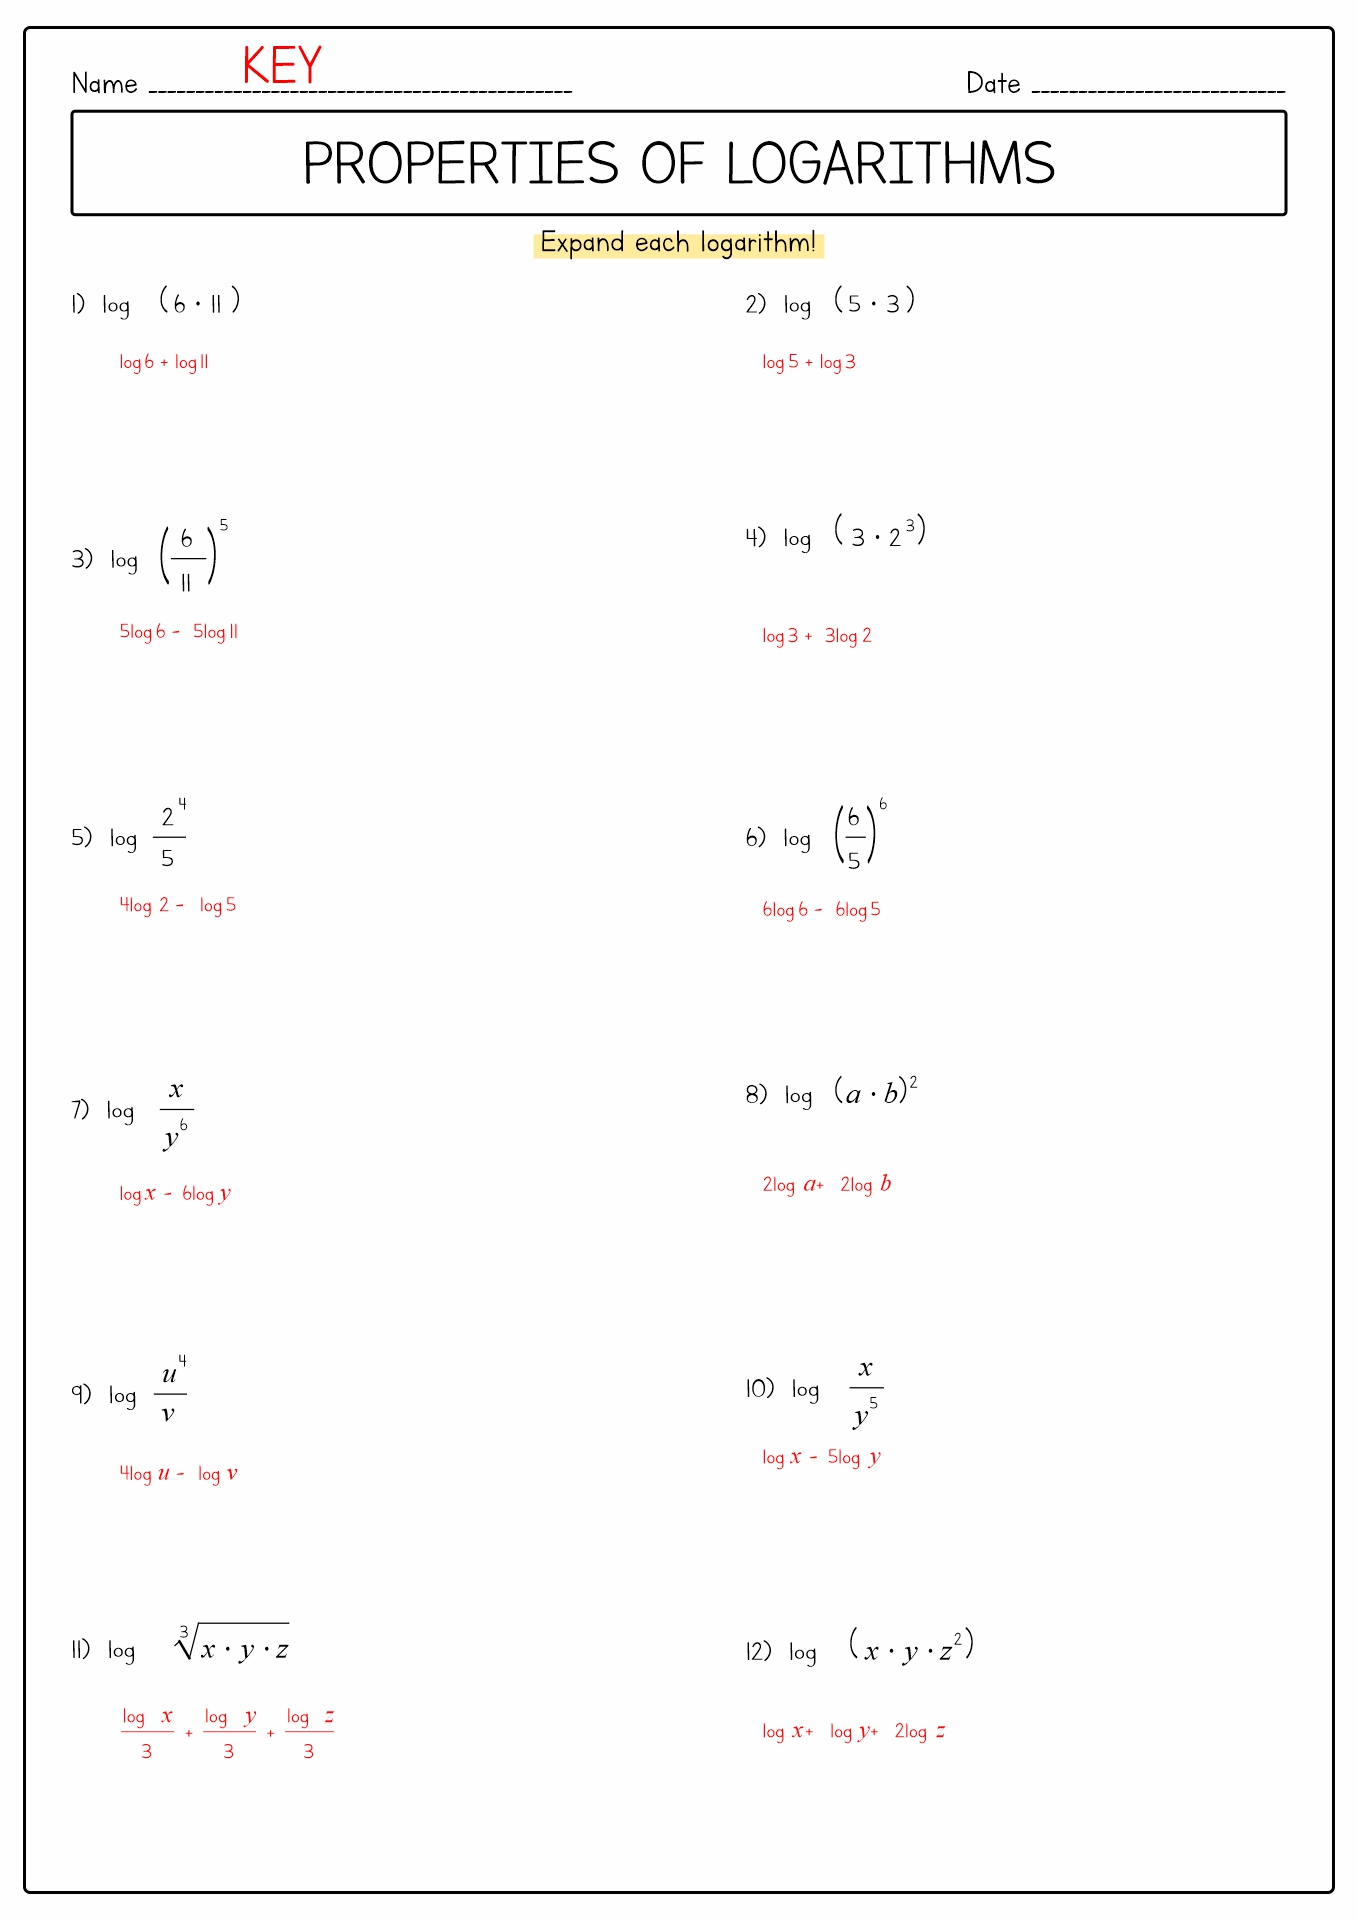 Properties of Logarithms Worksheet Answers